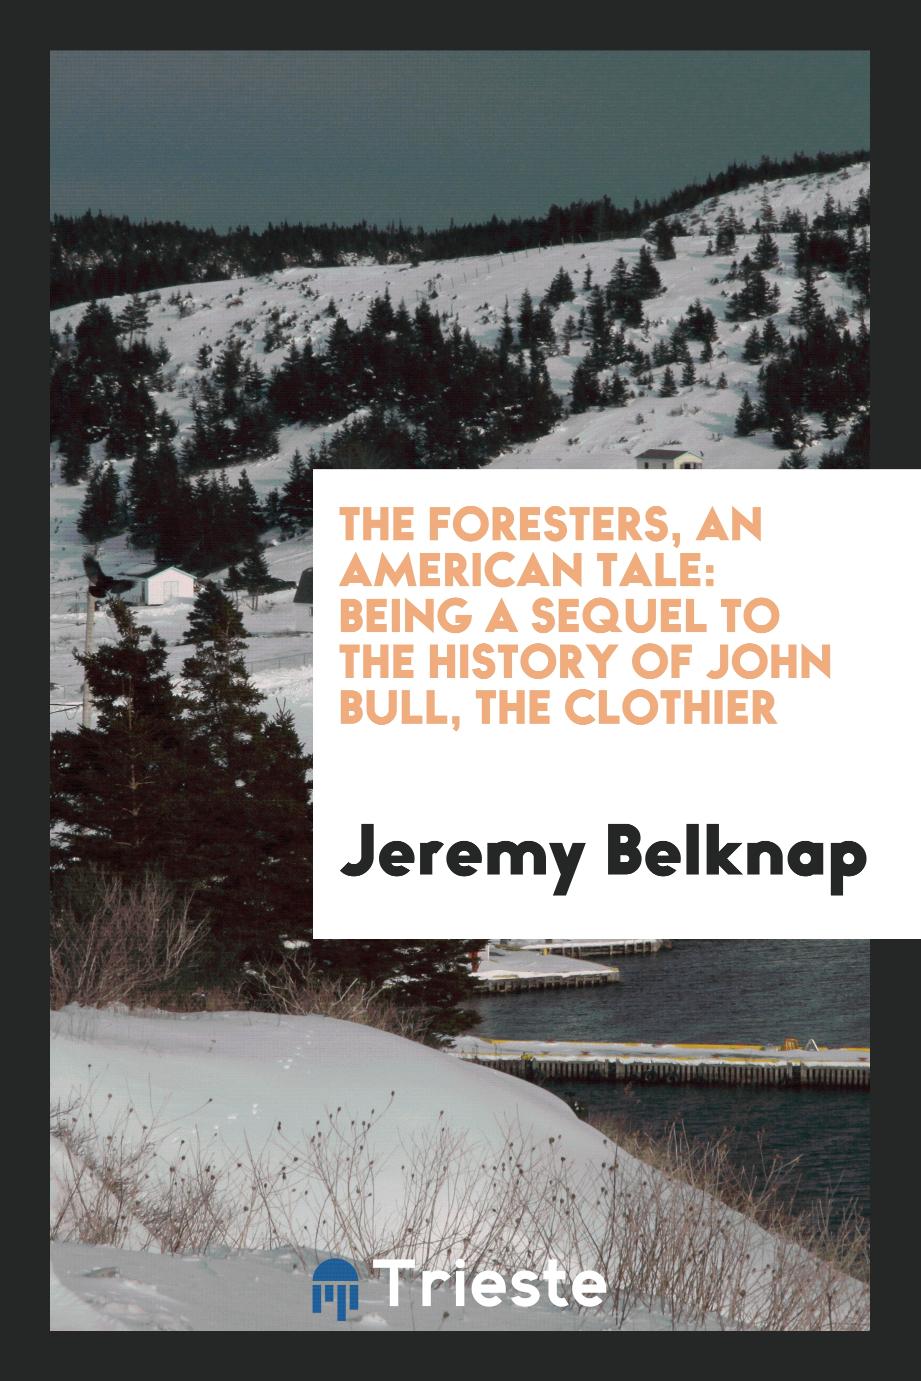 The Foresters, an American Tale: Being a Sequel to the History of John Bull, the Clothier